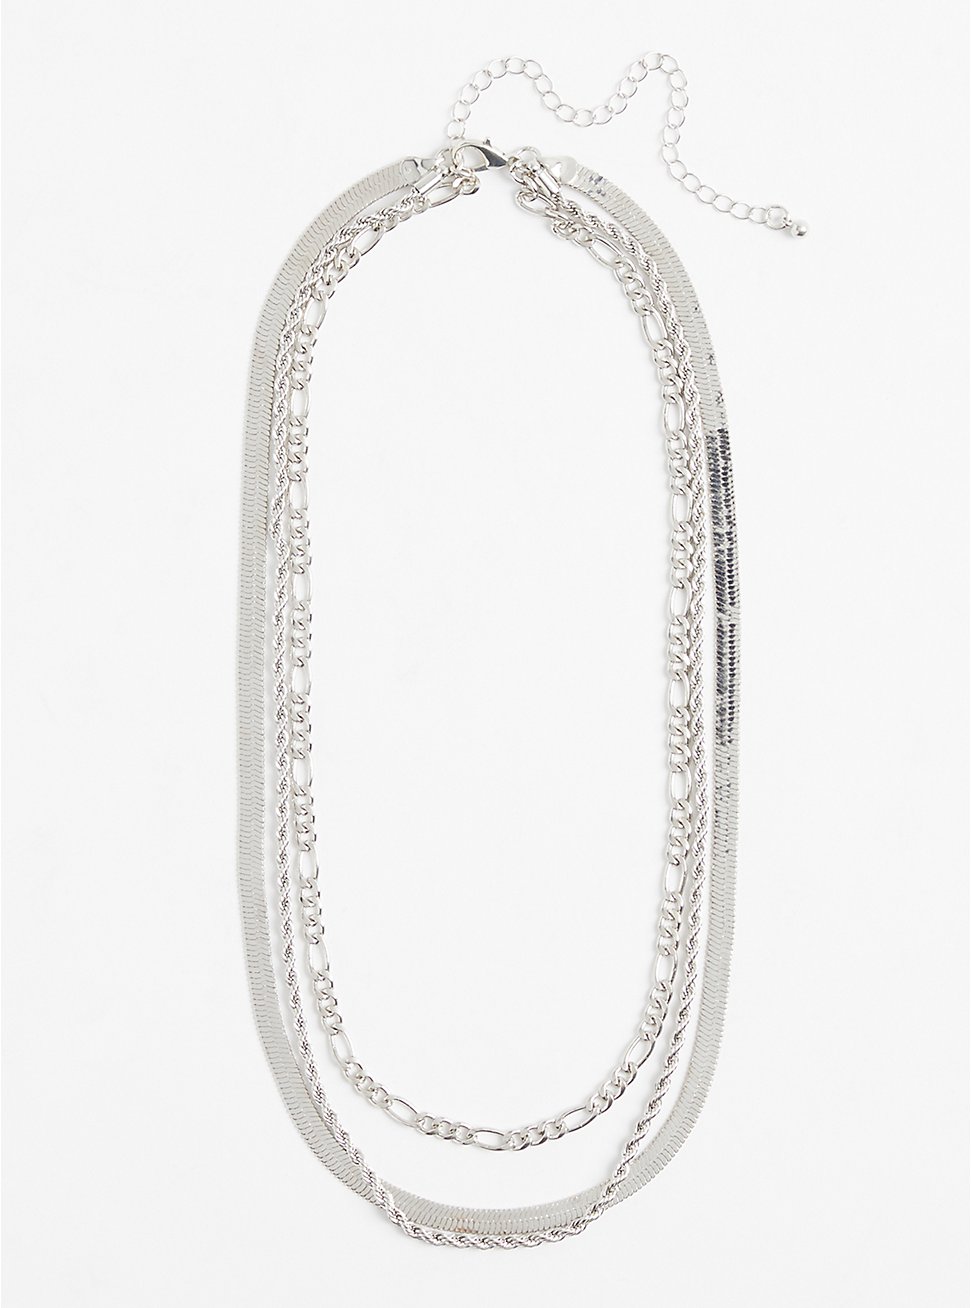 Plus Size Chain Layered Necklace - Silver Tone, , hi-res